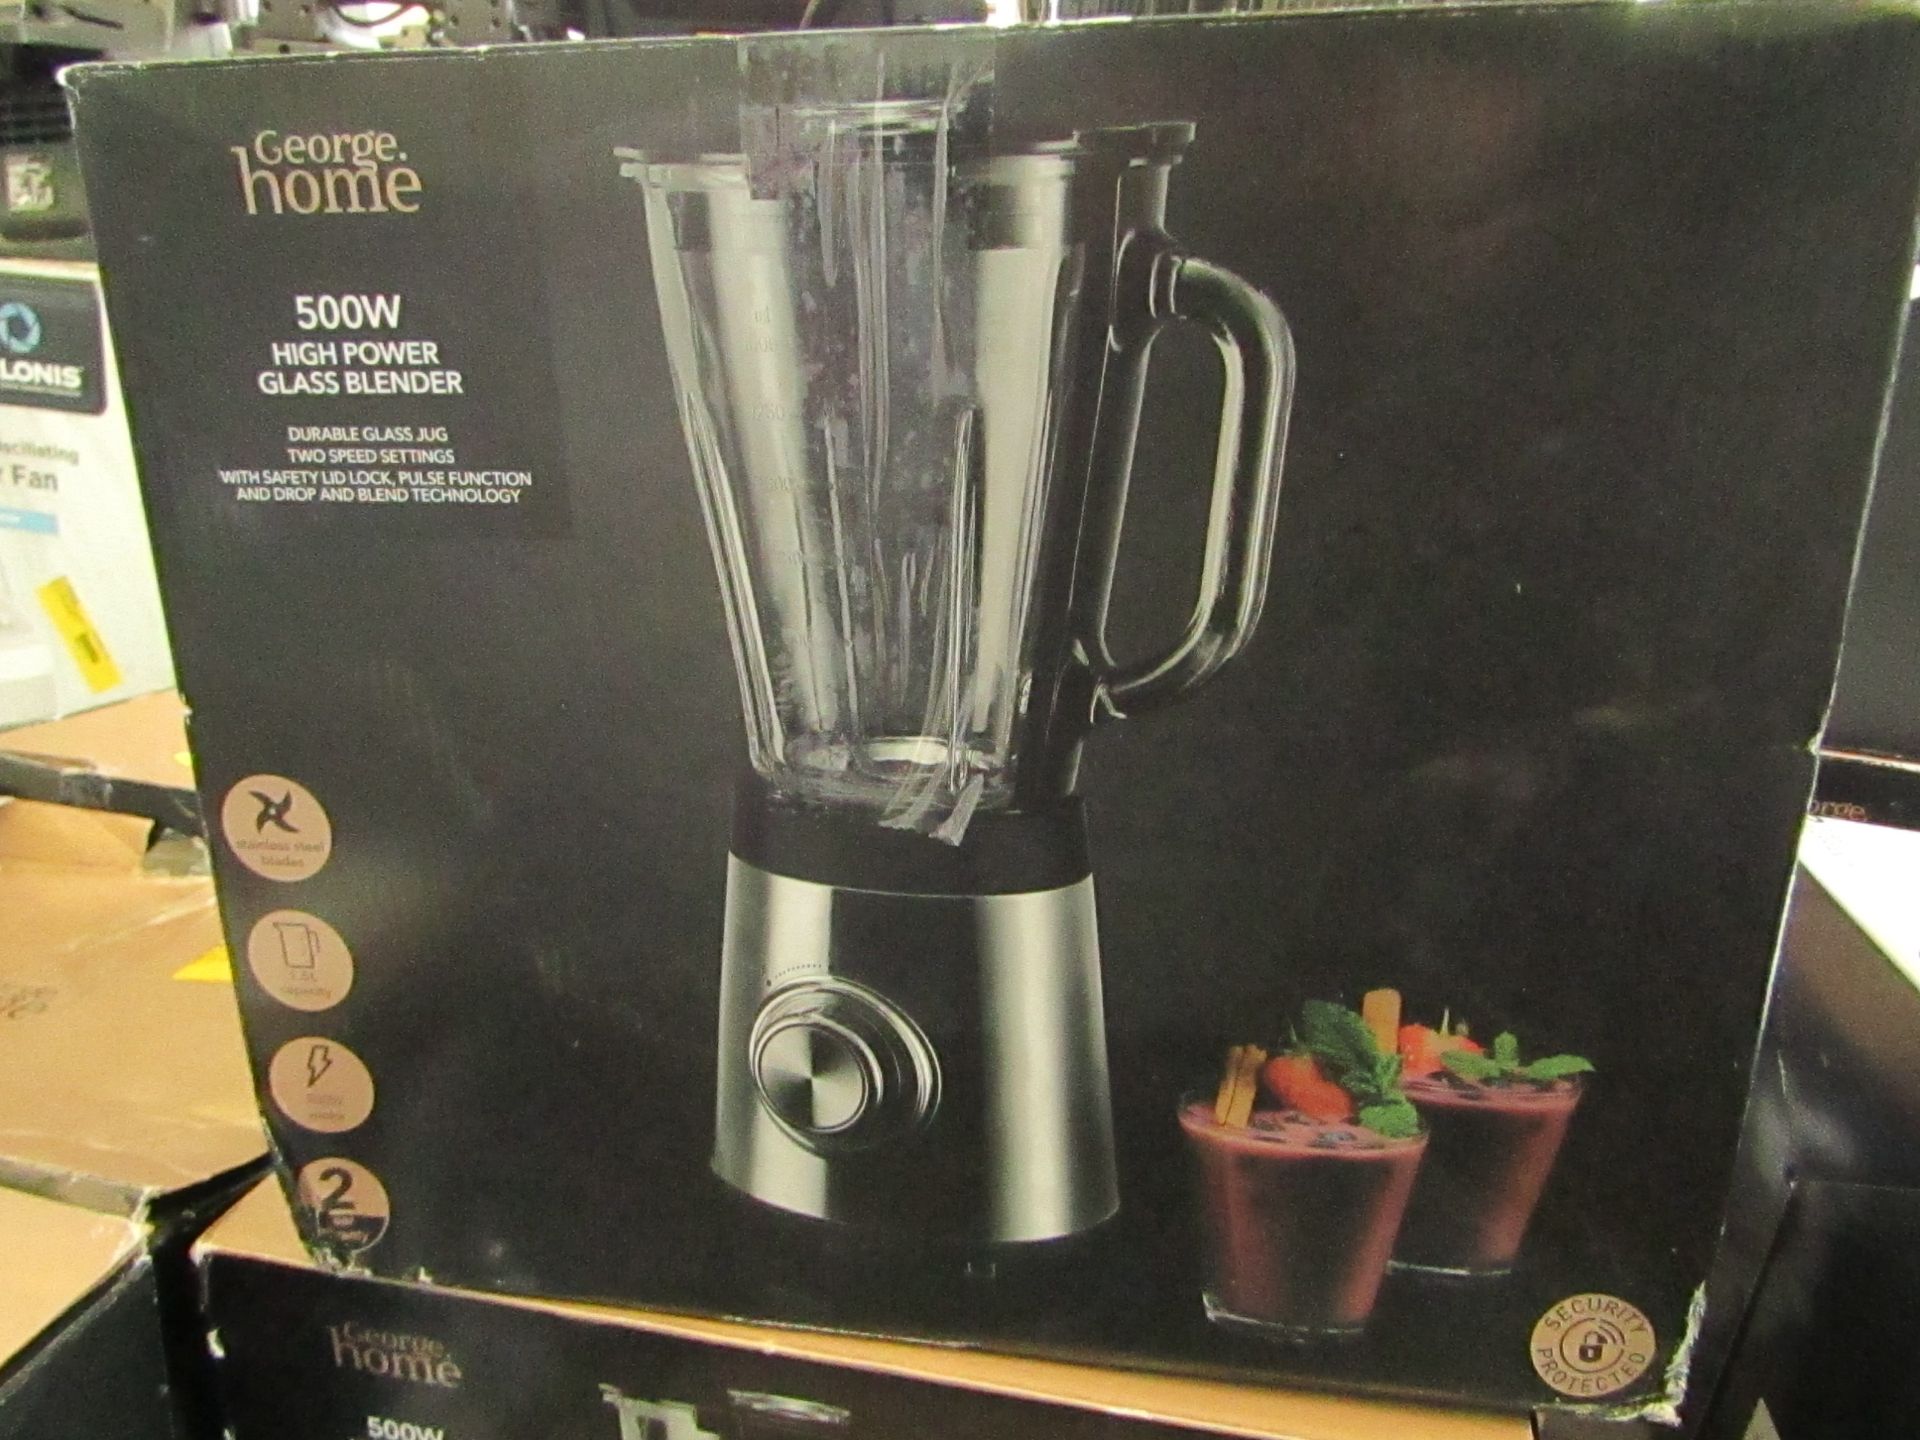 | 2X | 500W 1.5L STAINLESS STEEL HIGH POWER GLASS BLENDER | UNCHECKED & BOXED | NO ONLINE RESALE |